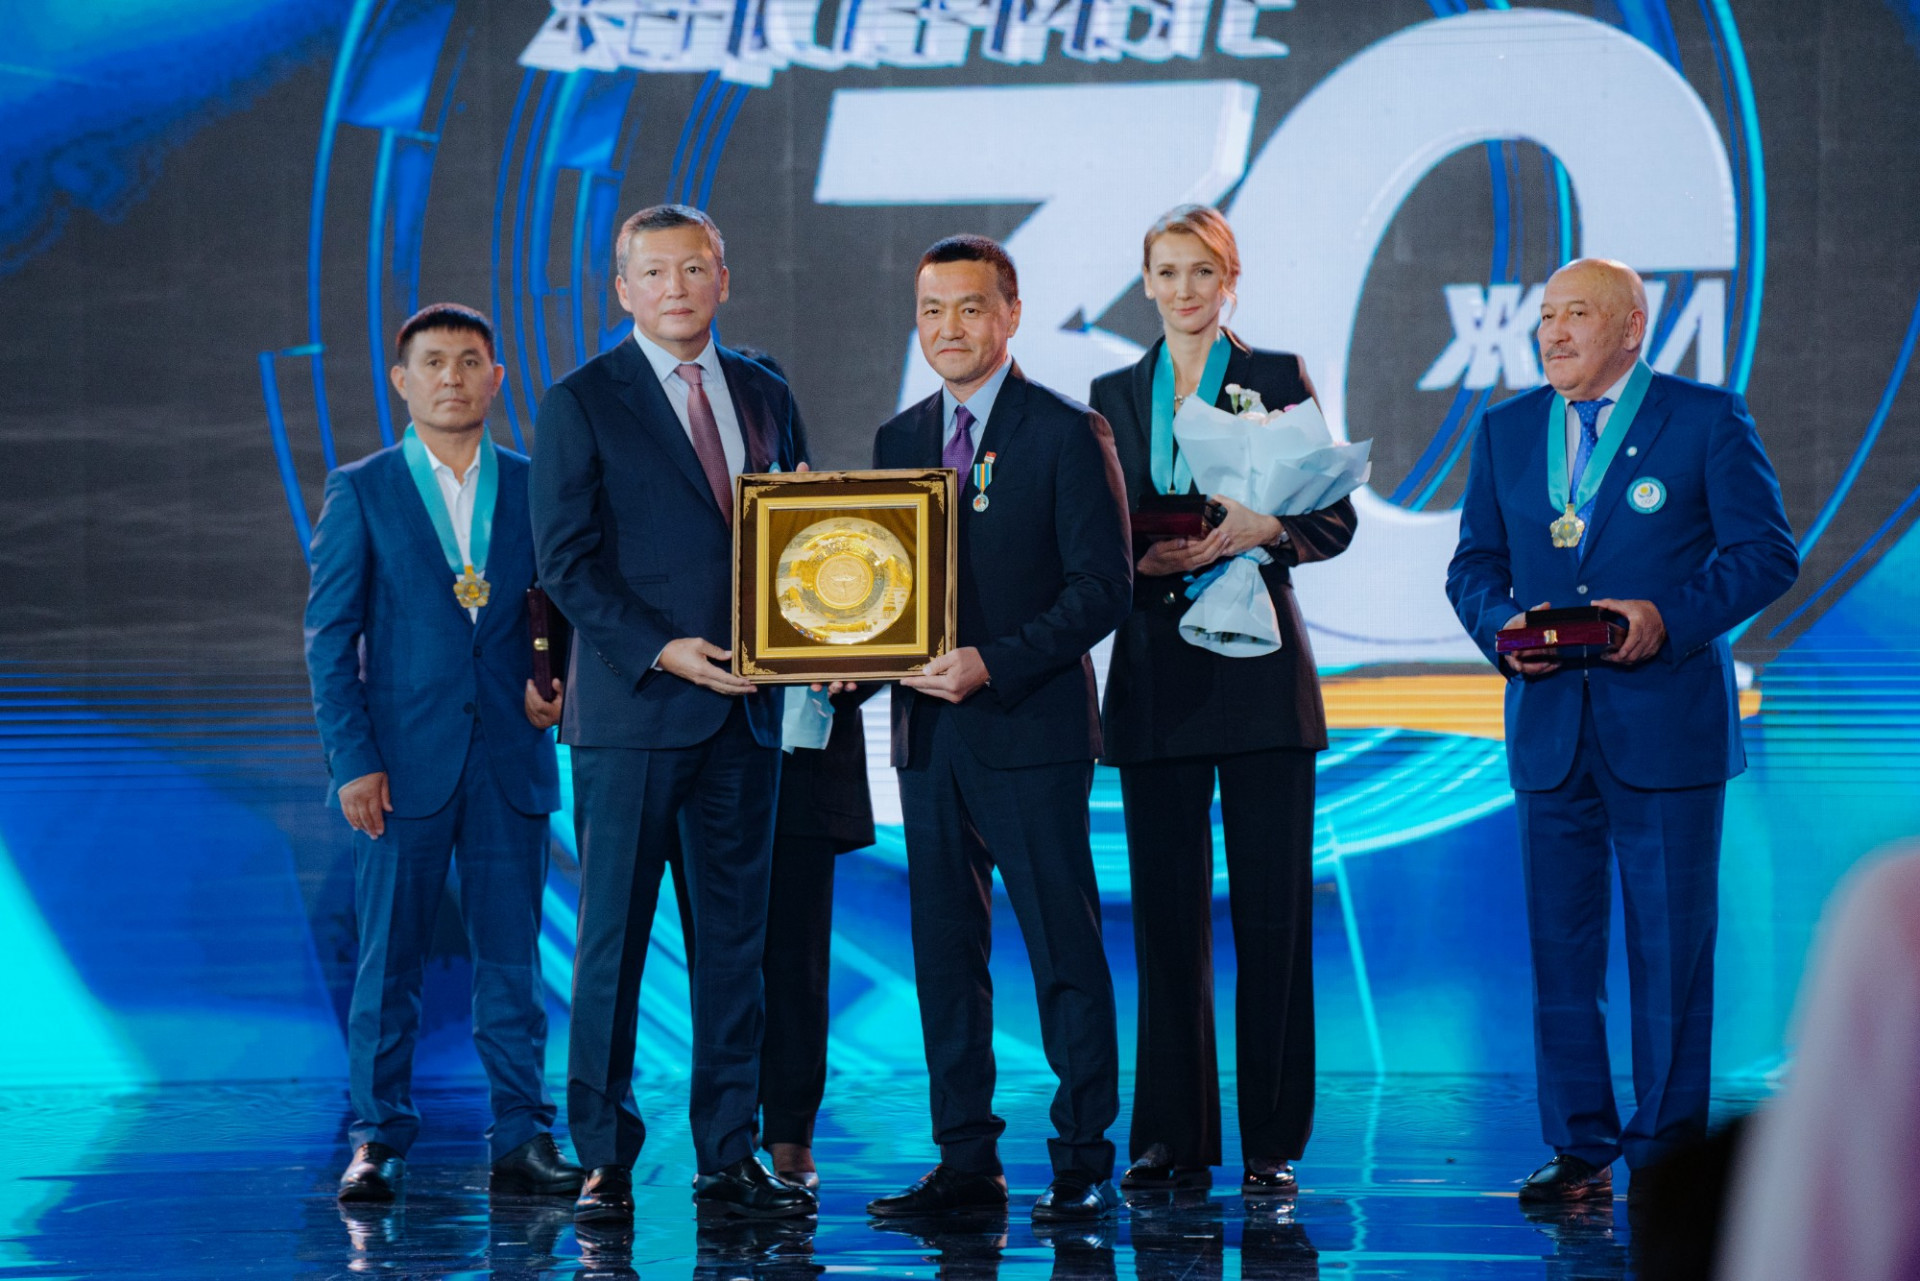  Olympic medallists and coaches were honoured as the National Olympic Committee of the Republic of Kazakhstan celebrated its 30-year anniversary this month ©HOK